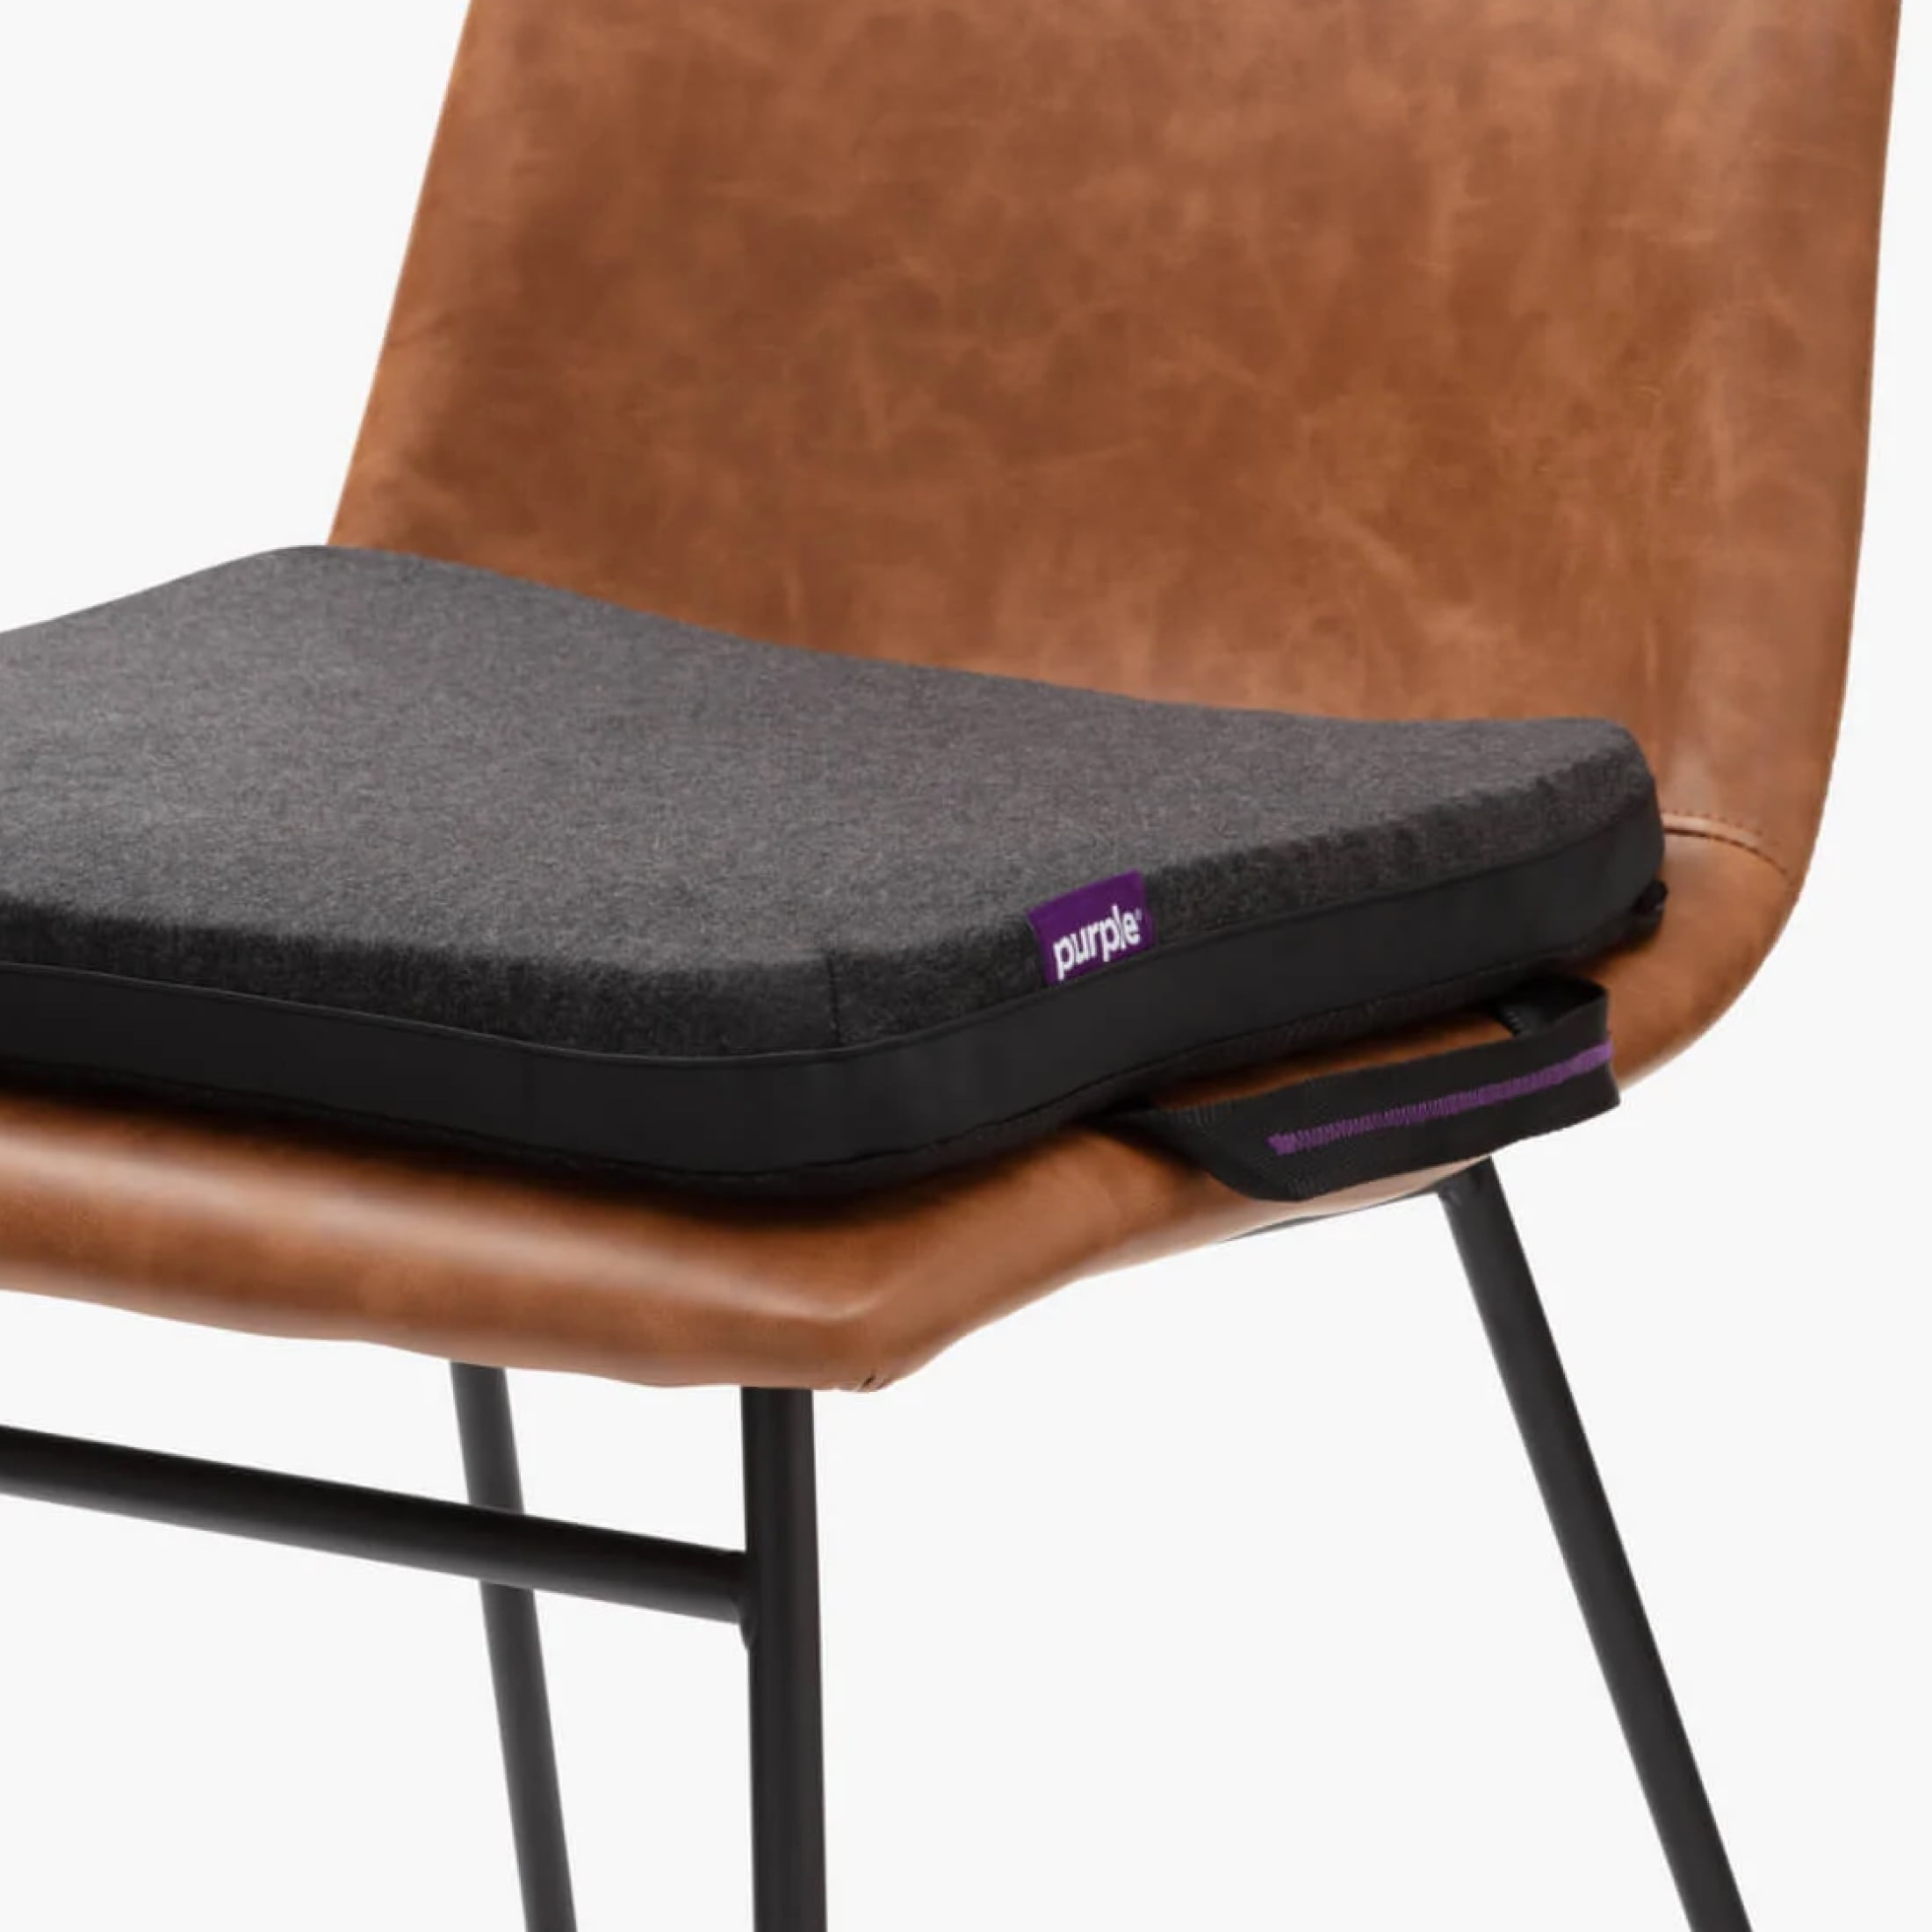 Purple Back Cushion | Pressure Reducing Grid Designed for Ultimate Comfort  | Designed for Chairs, Gaming, and Travel | Made in The USA